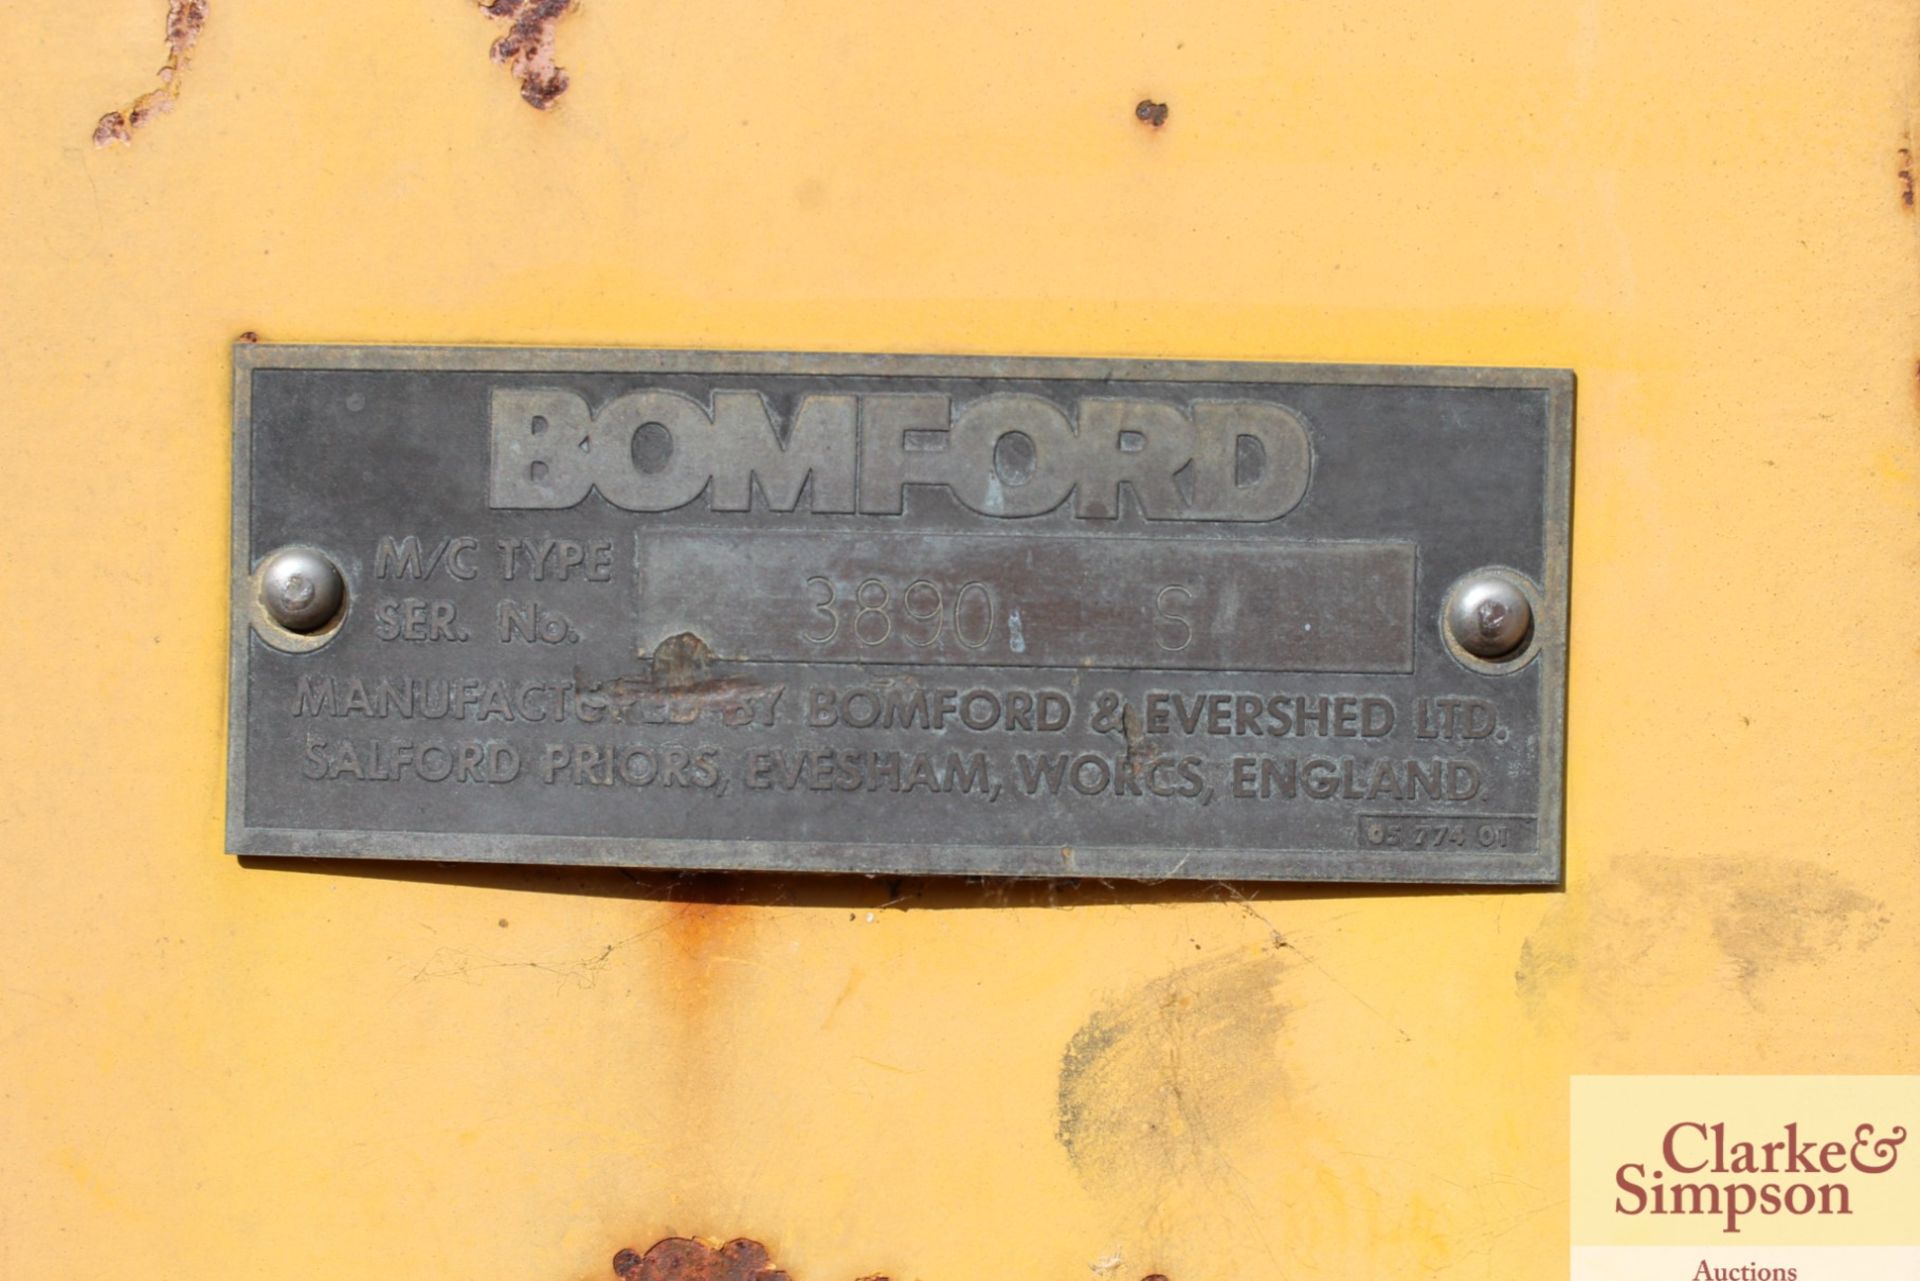 Bomford Supertrim linkage conversion hedge cutter. Serial number 3890. - Image 11 of 11